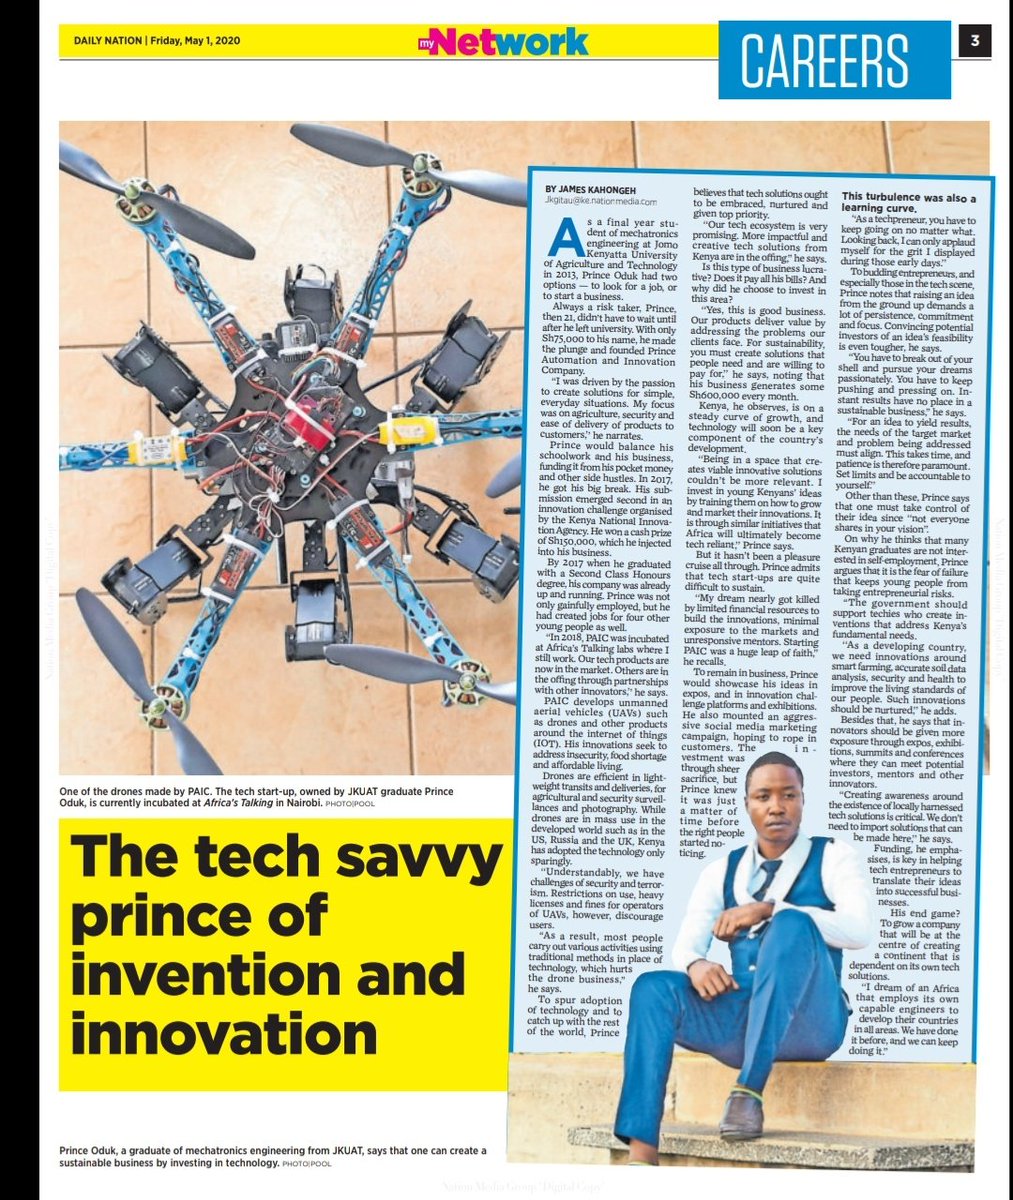 Grab your copy of today's (May 1st, 2020) copy Kenya's Daily Nation Newspaper and read article on myNetwork page 3. A dive into how far PAIC LIMITED has come.
#OurOwnInnovationForOurOwnPeople 
#Techpreneurship
#InnovationsInTech
#AfricaRising
#PAIC_Limited